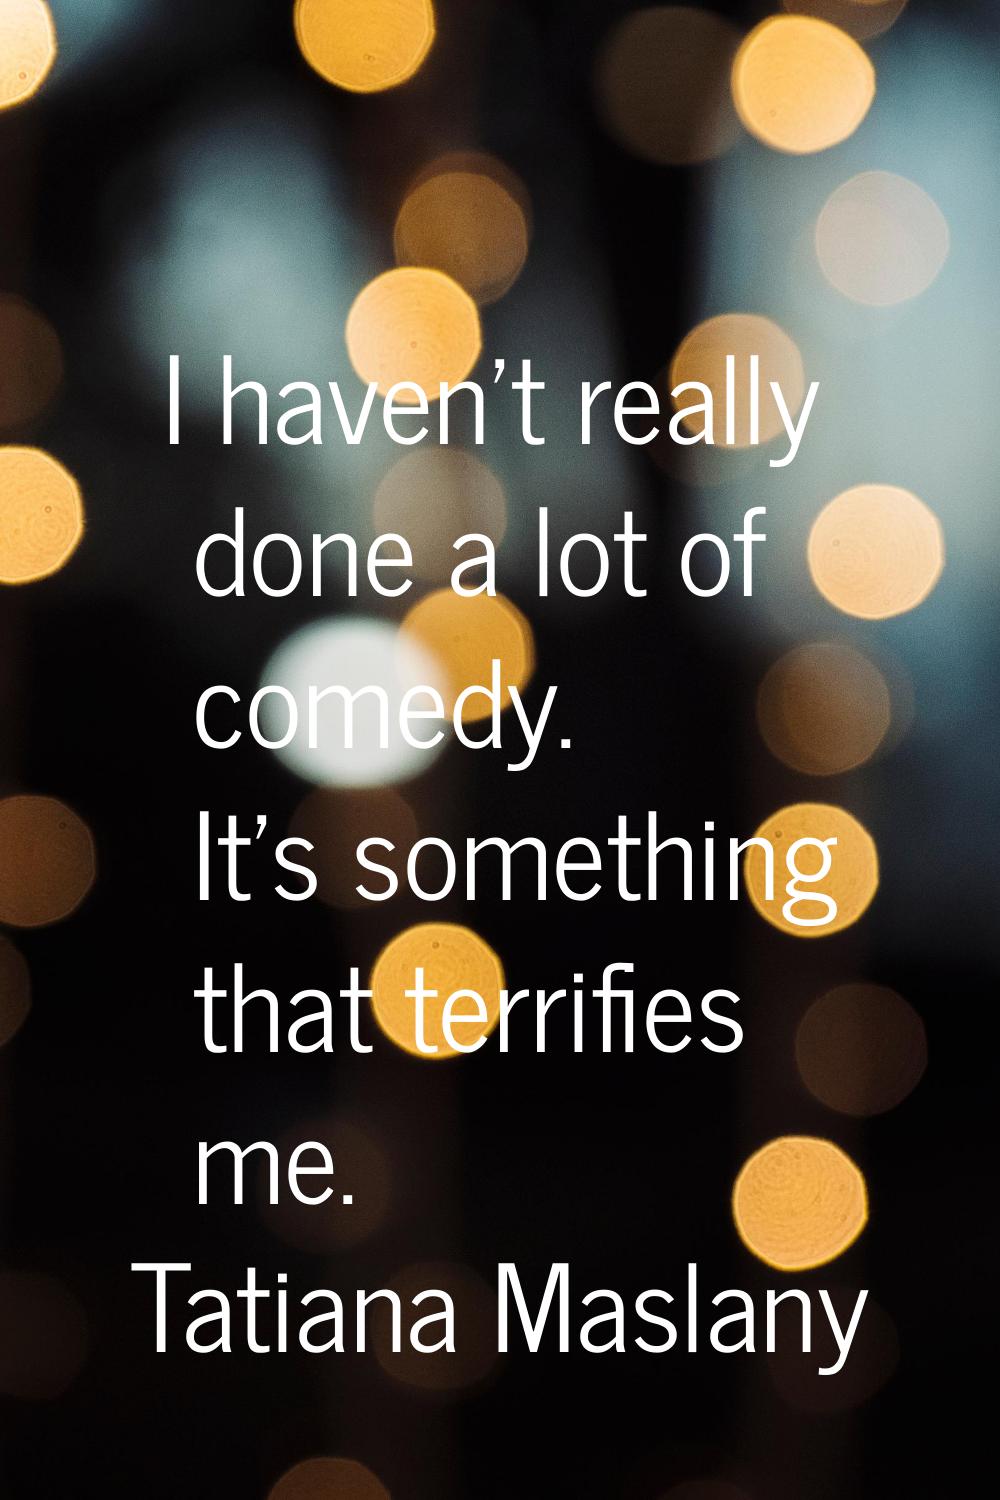 I haven't really done a lot of comedy. It's something that terrifies me.